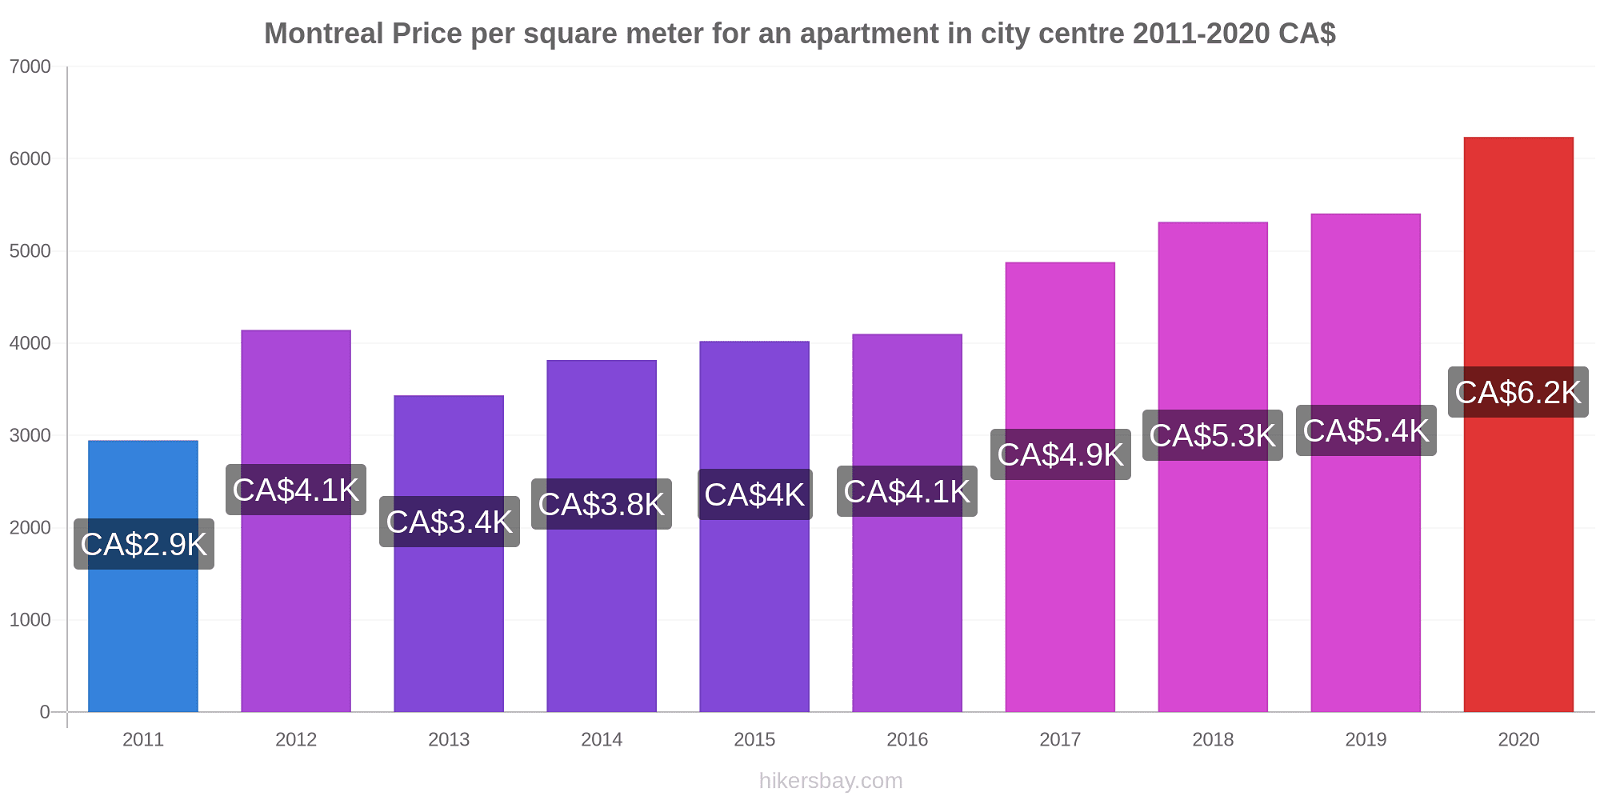 Montreal price changes Price per square meter for an apartment in city centre hikersbay.com